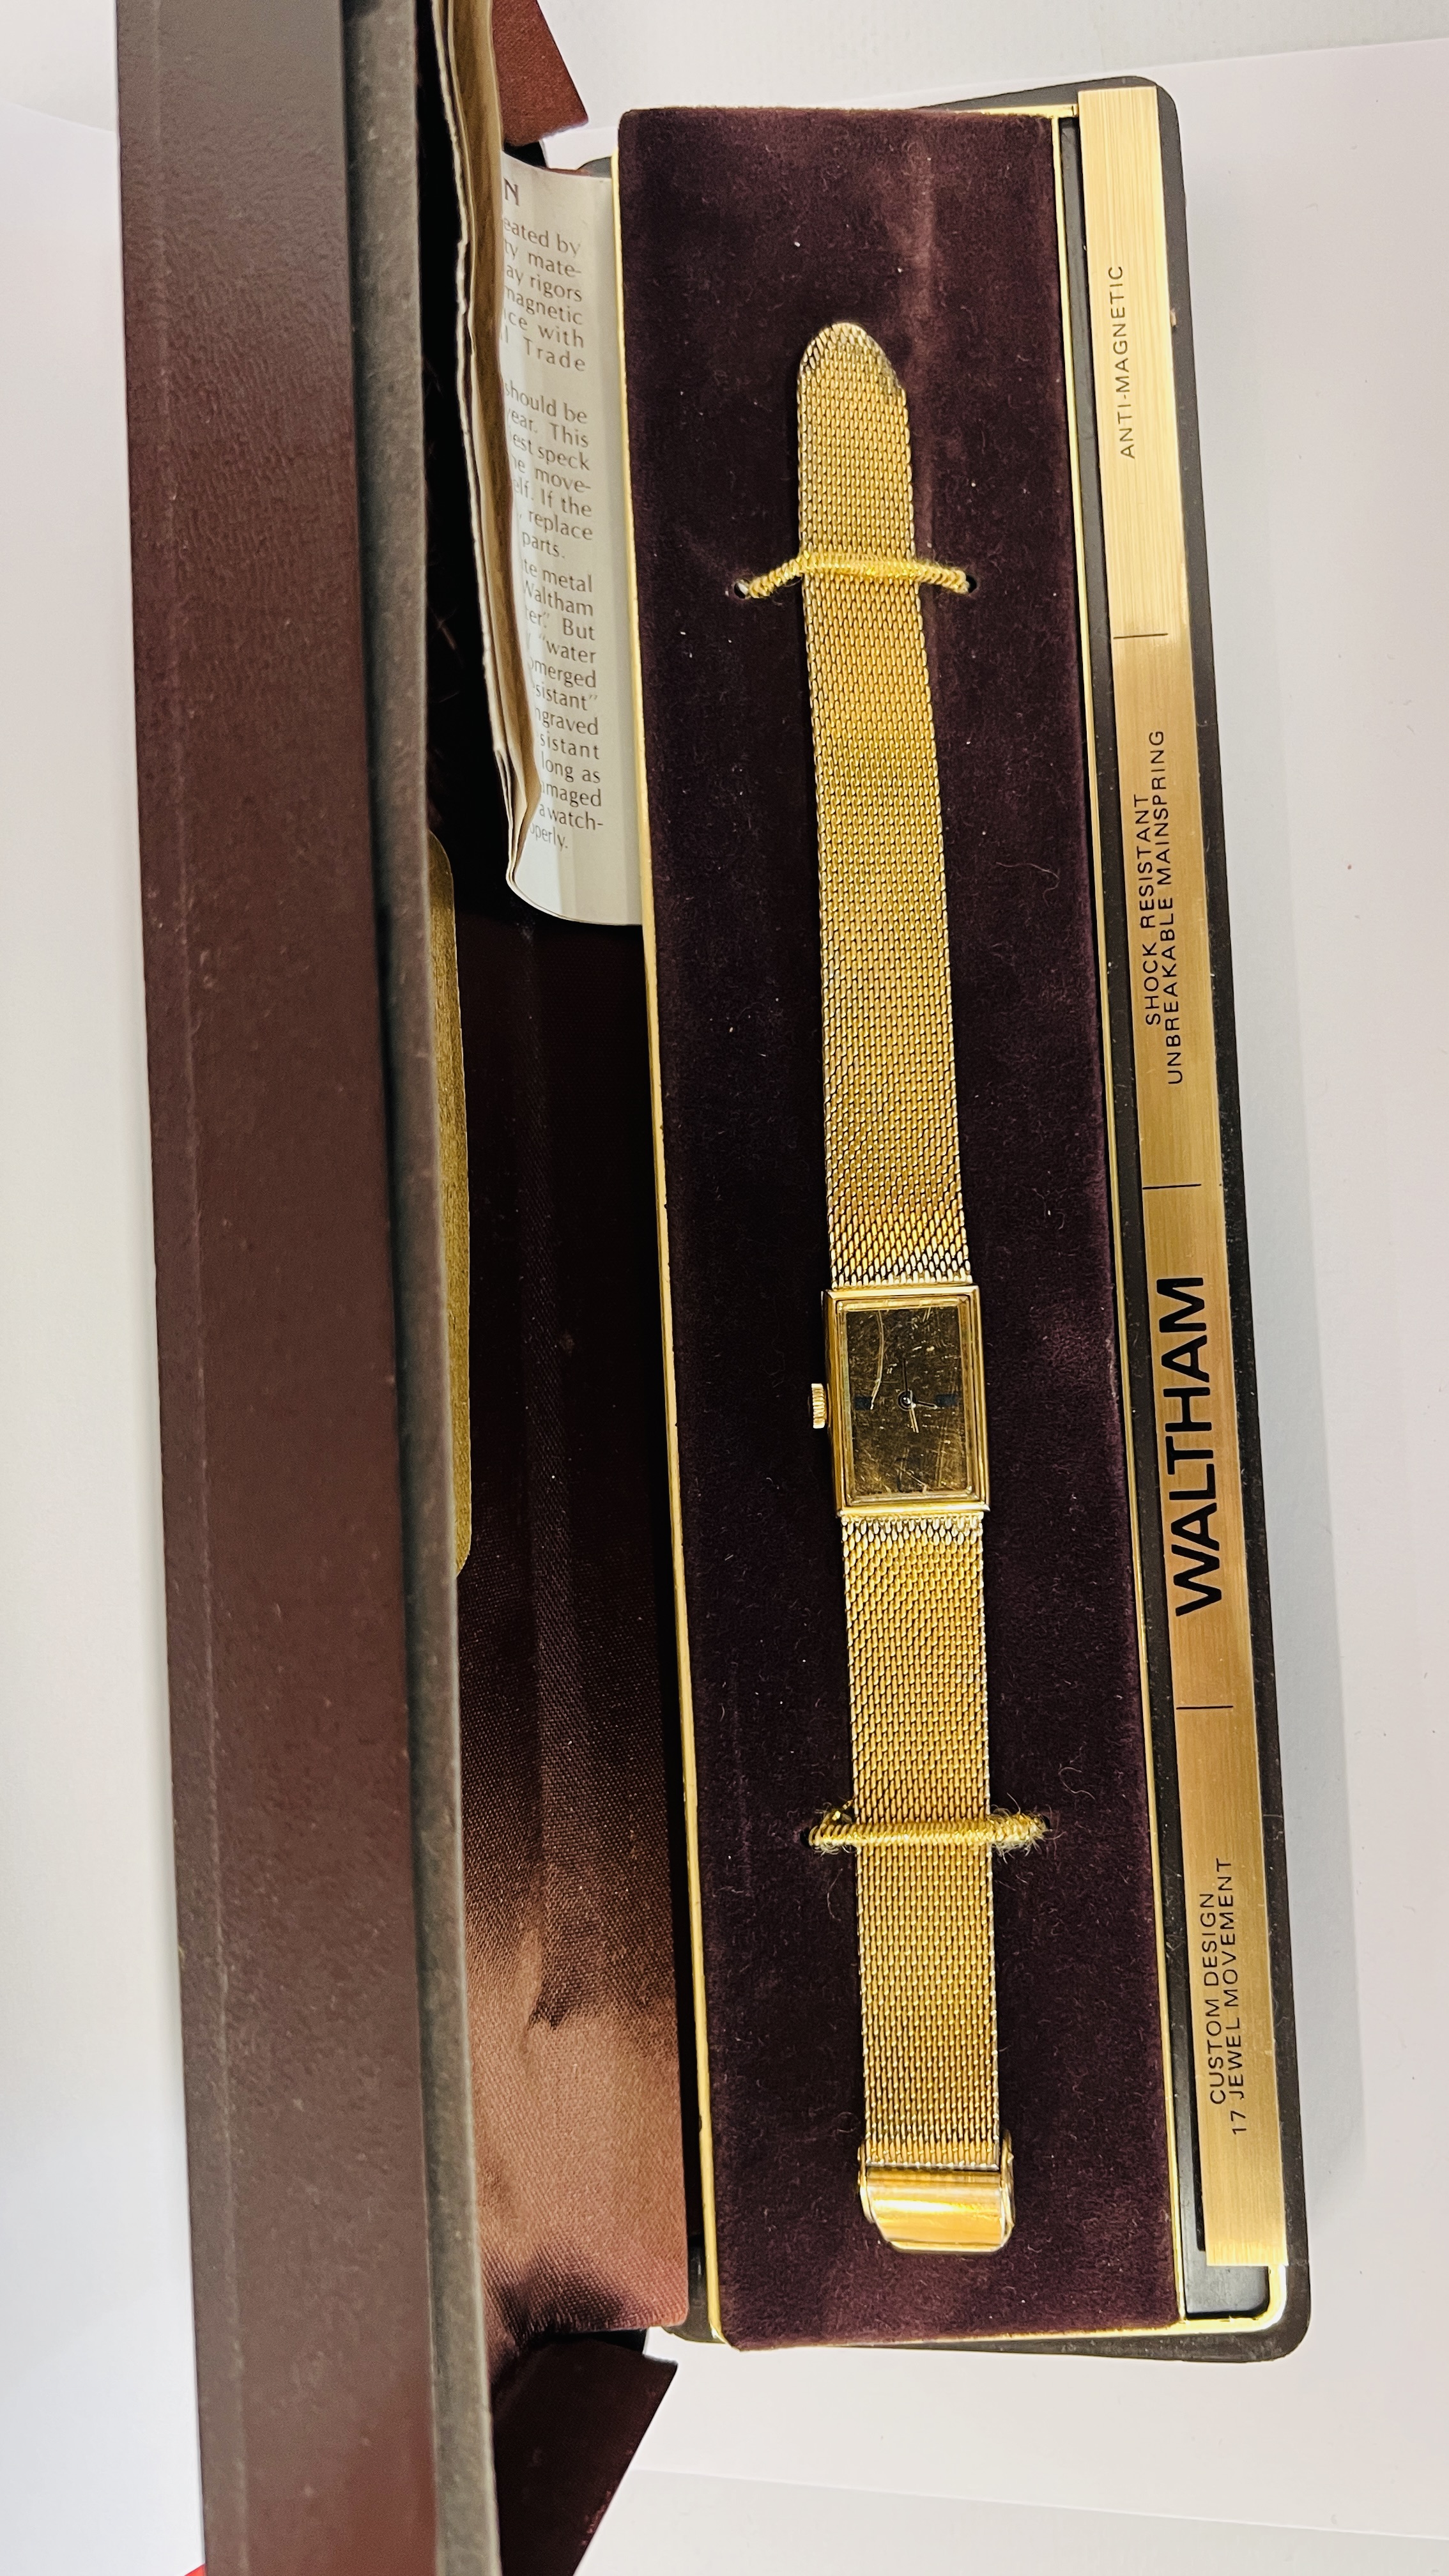 A VINTAGE GENT'S WRIST WATCH MARKED "WALTHAM" IN ORIGINAL BOX WITH WATCH OWNERS GUIDE. - Image 6 of 6